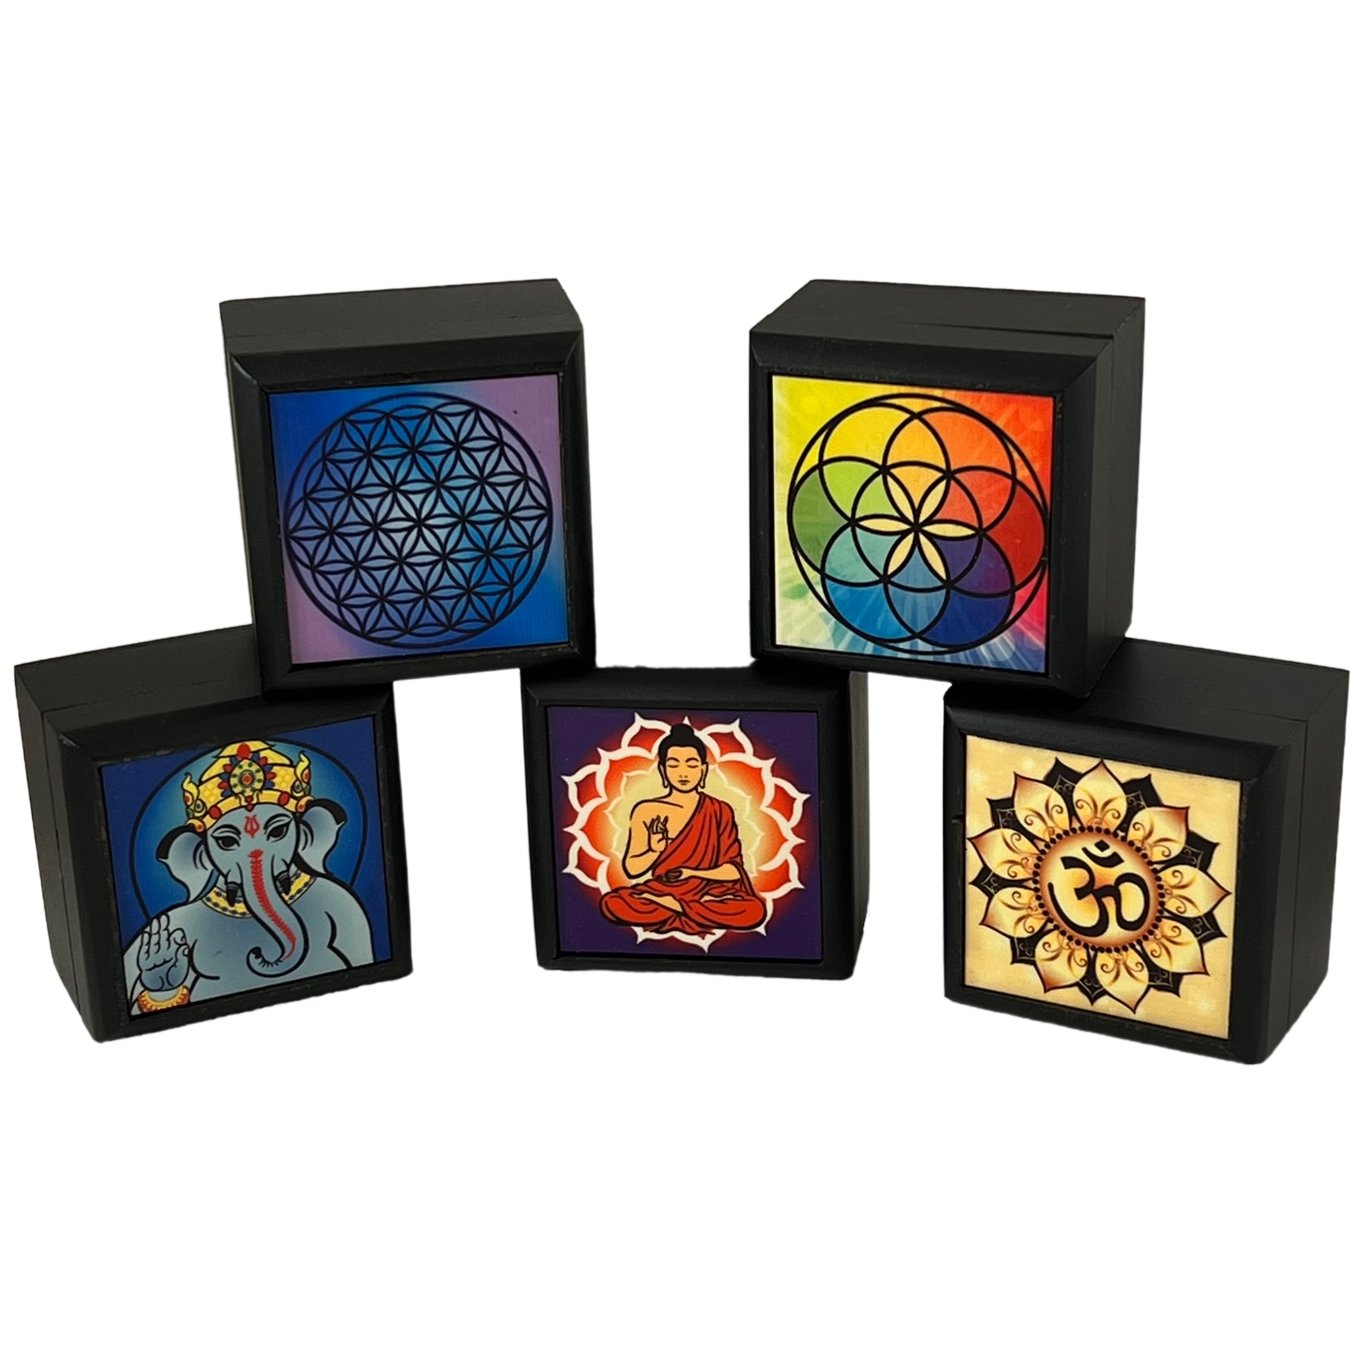 2" x 2" wood boxes with bright designs